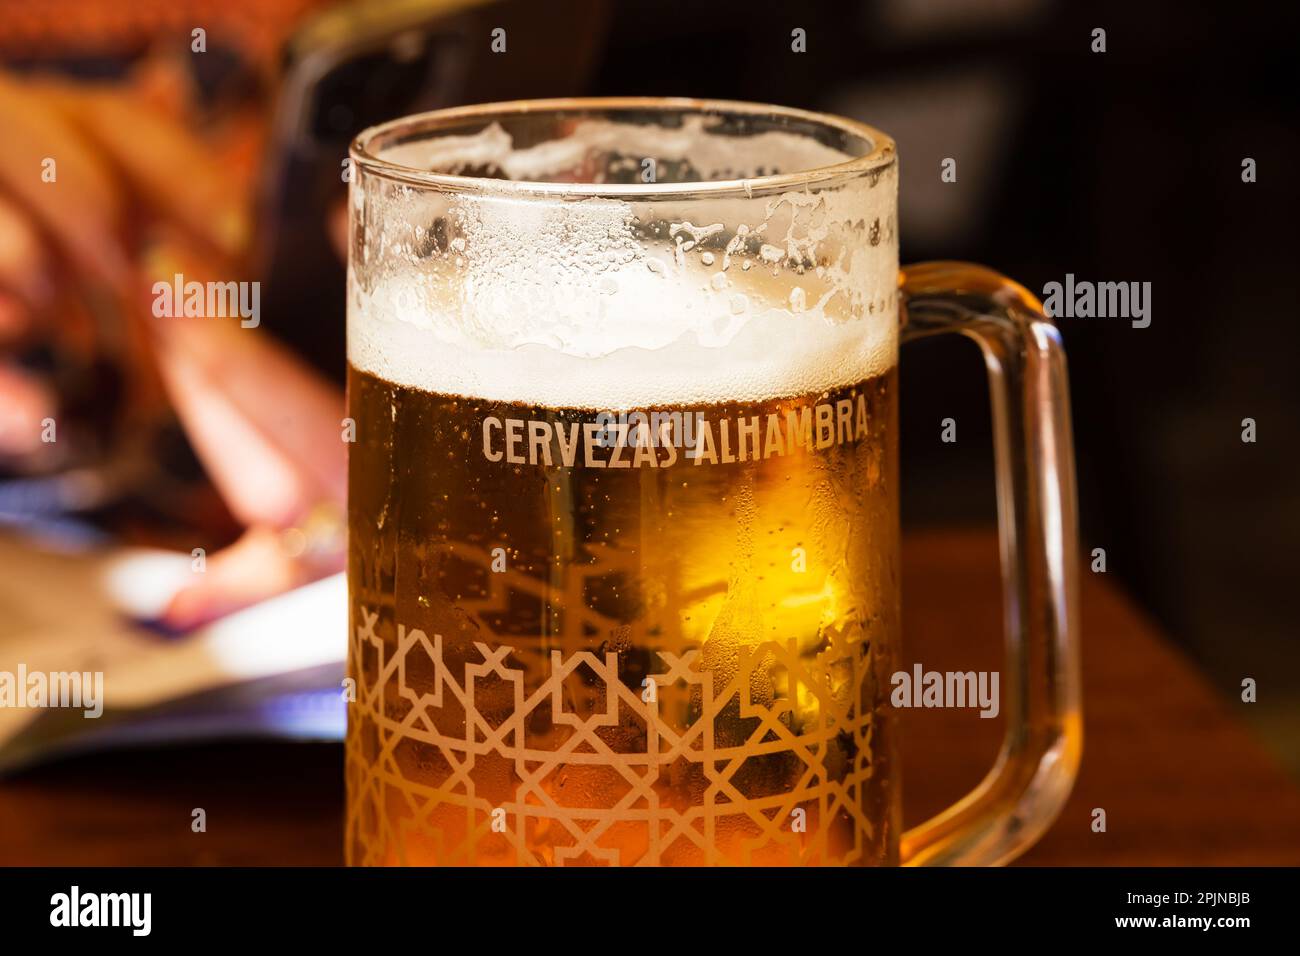 a refreshing glass of cold Cervezas Alhambra lager beer. Stock Photo